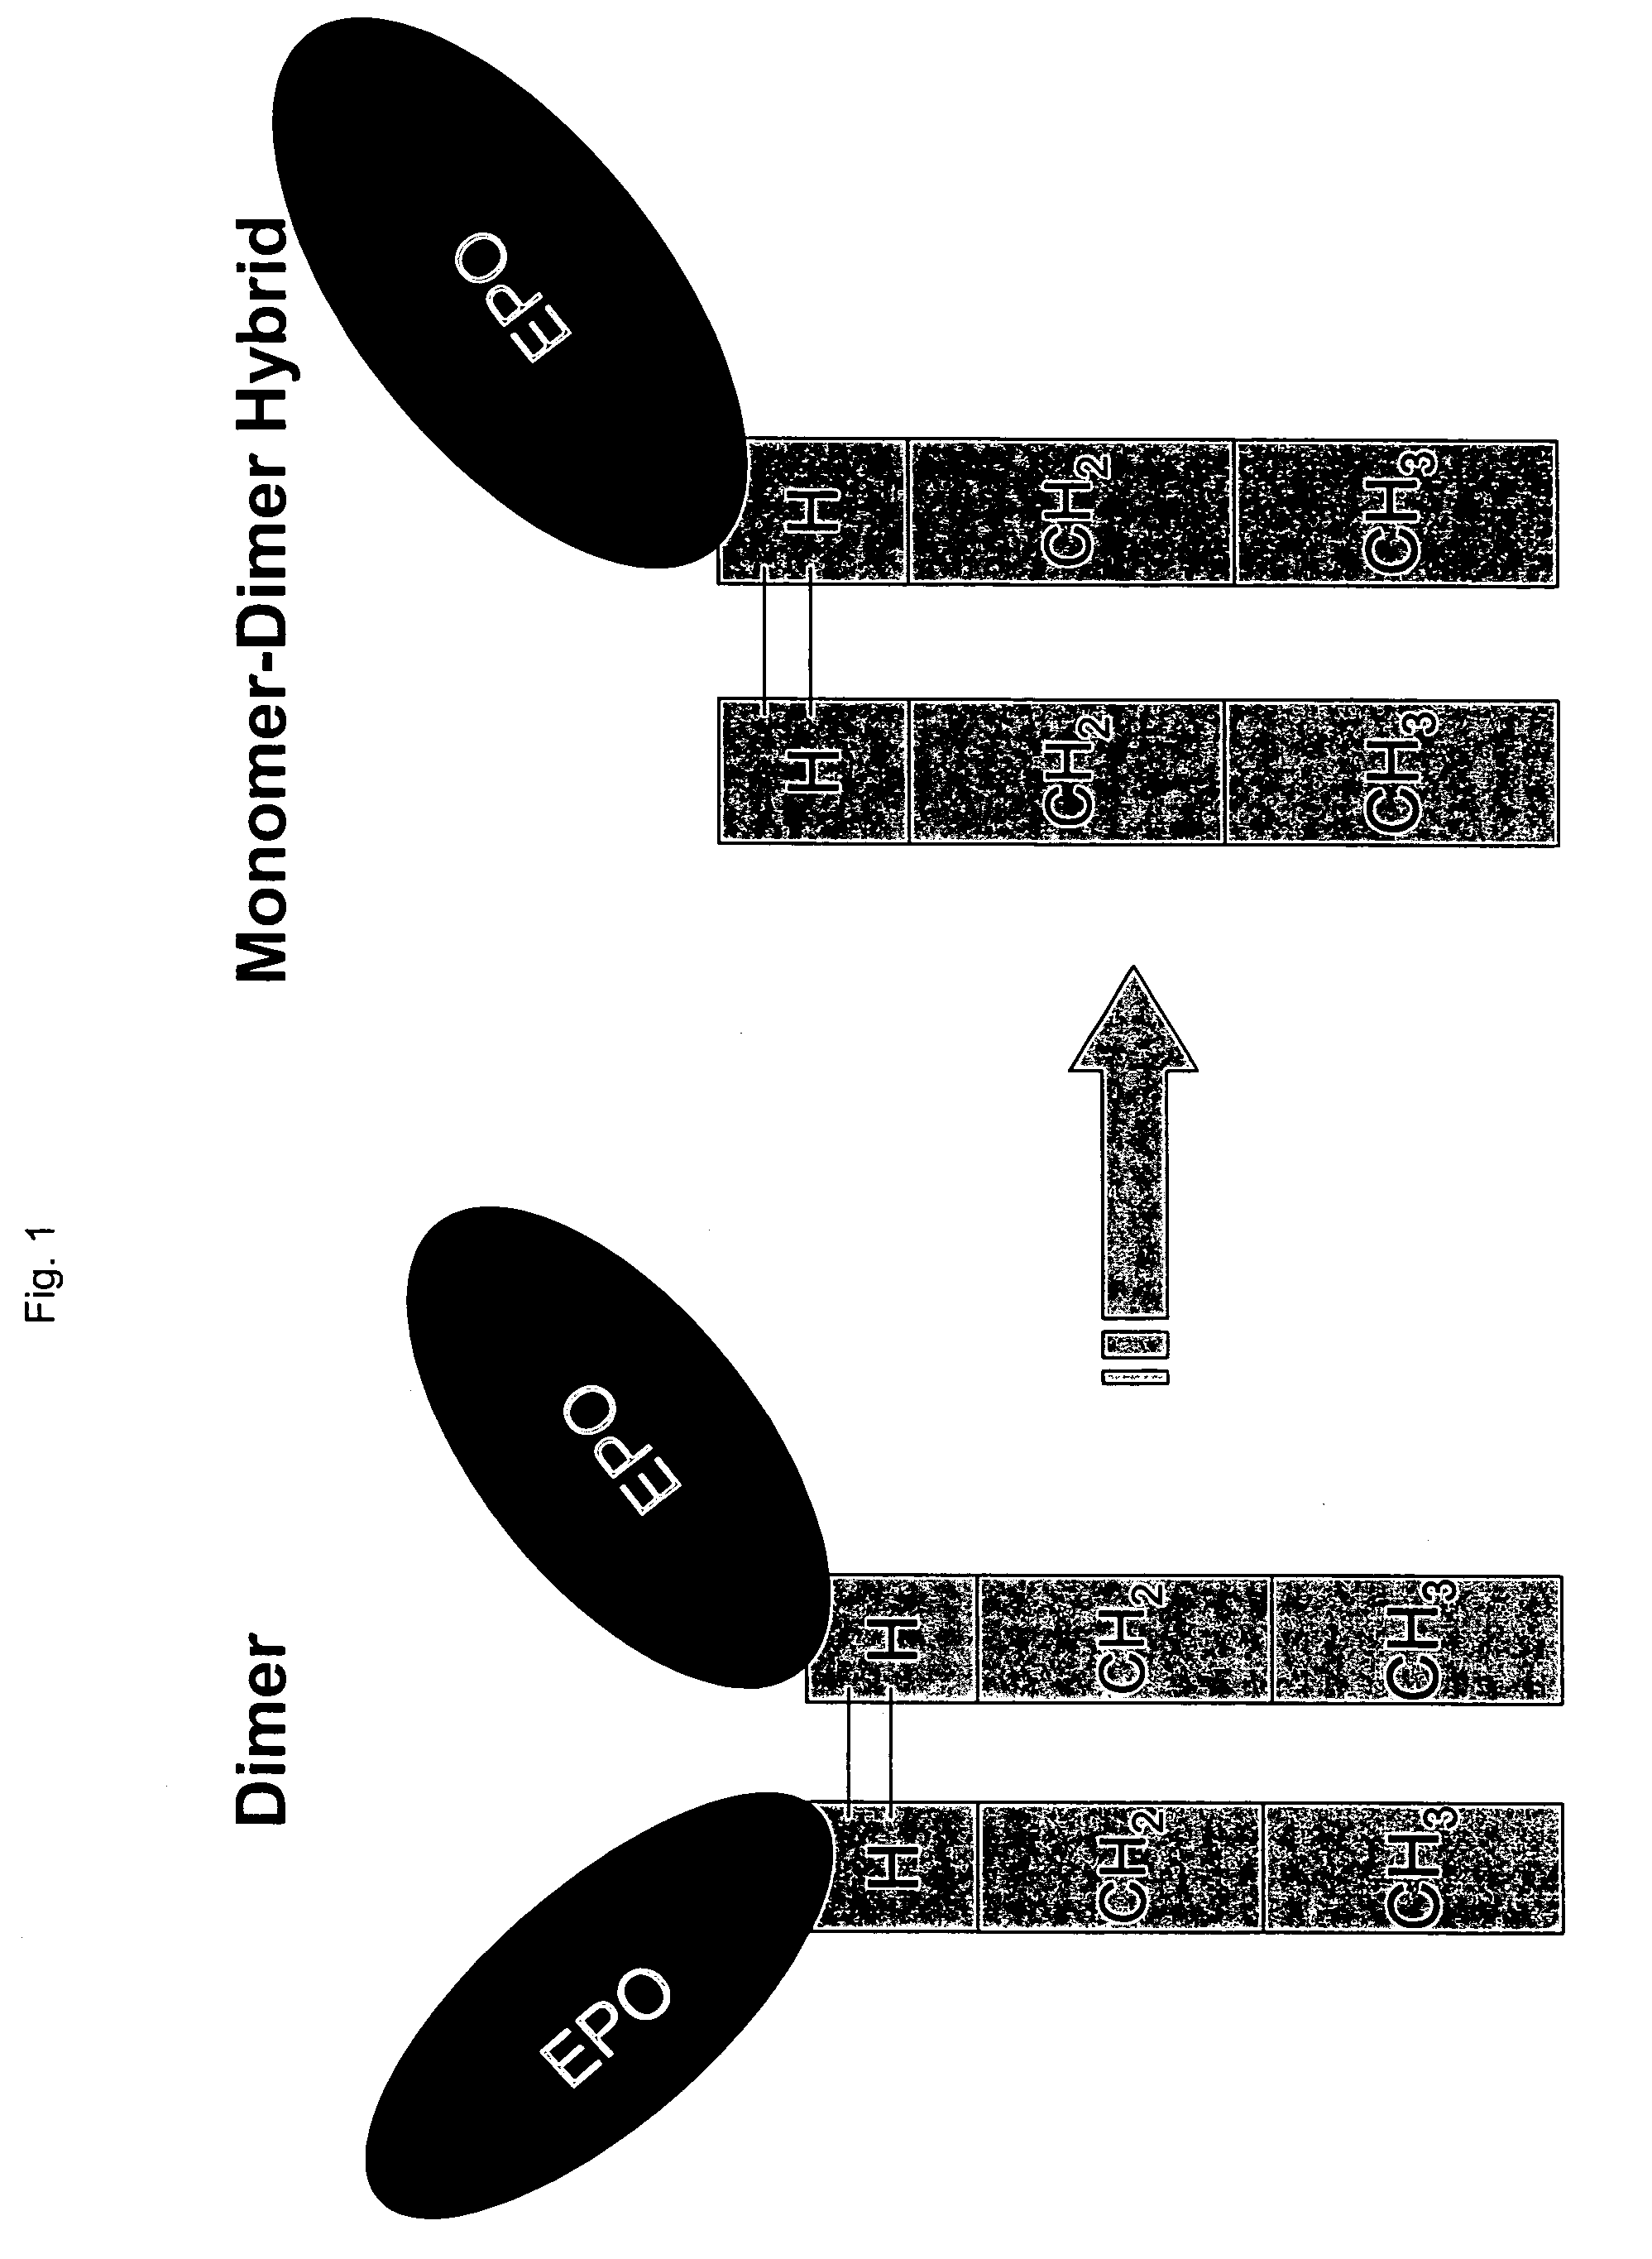 Methods for chemically synthesizing immunoglobulin chimeric proteins